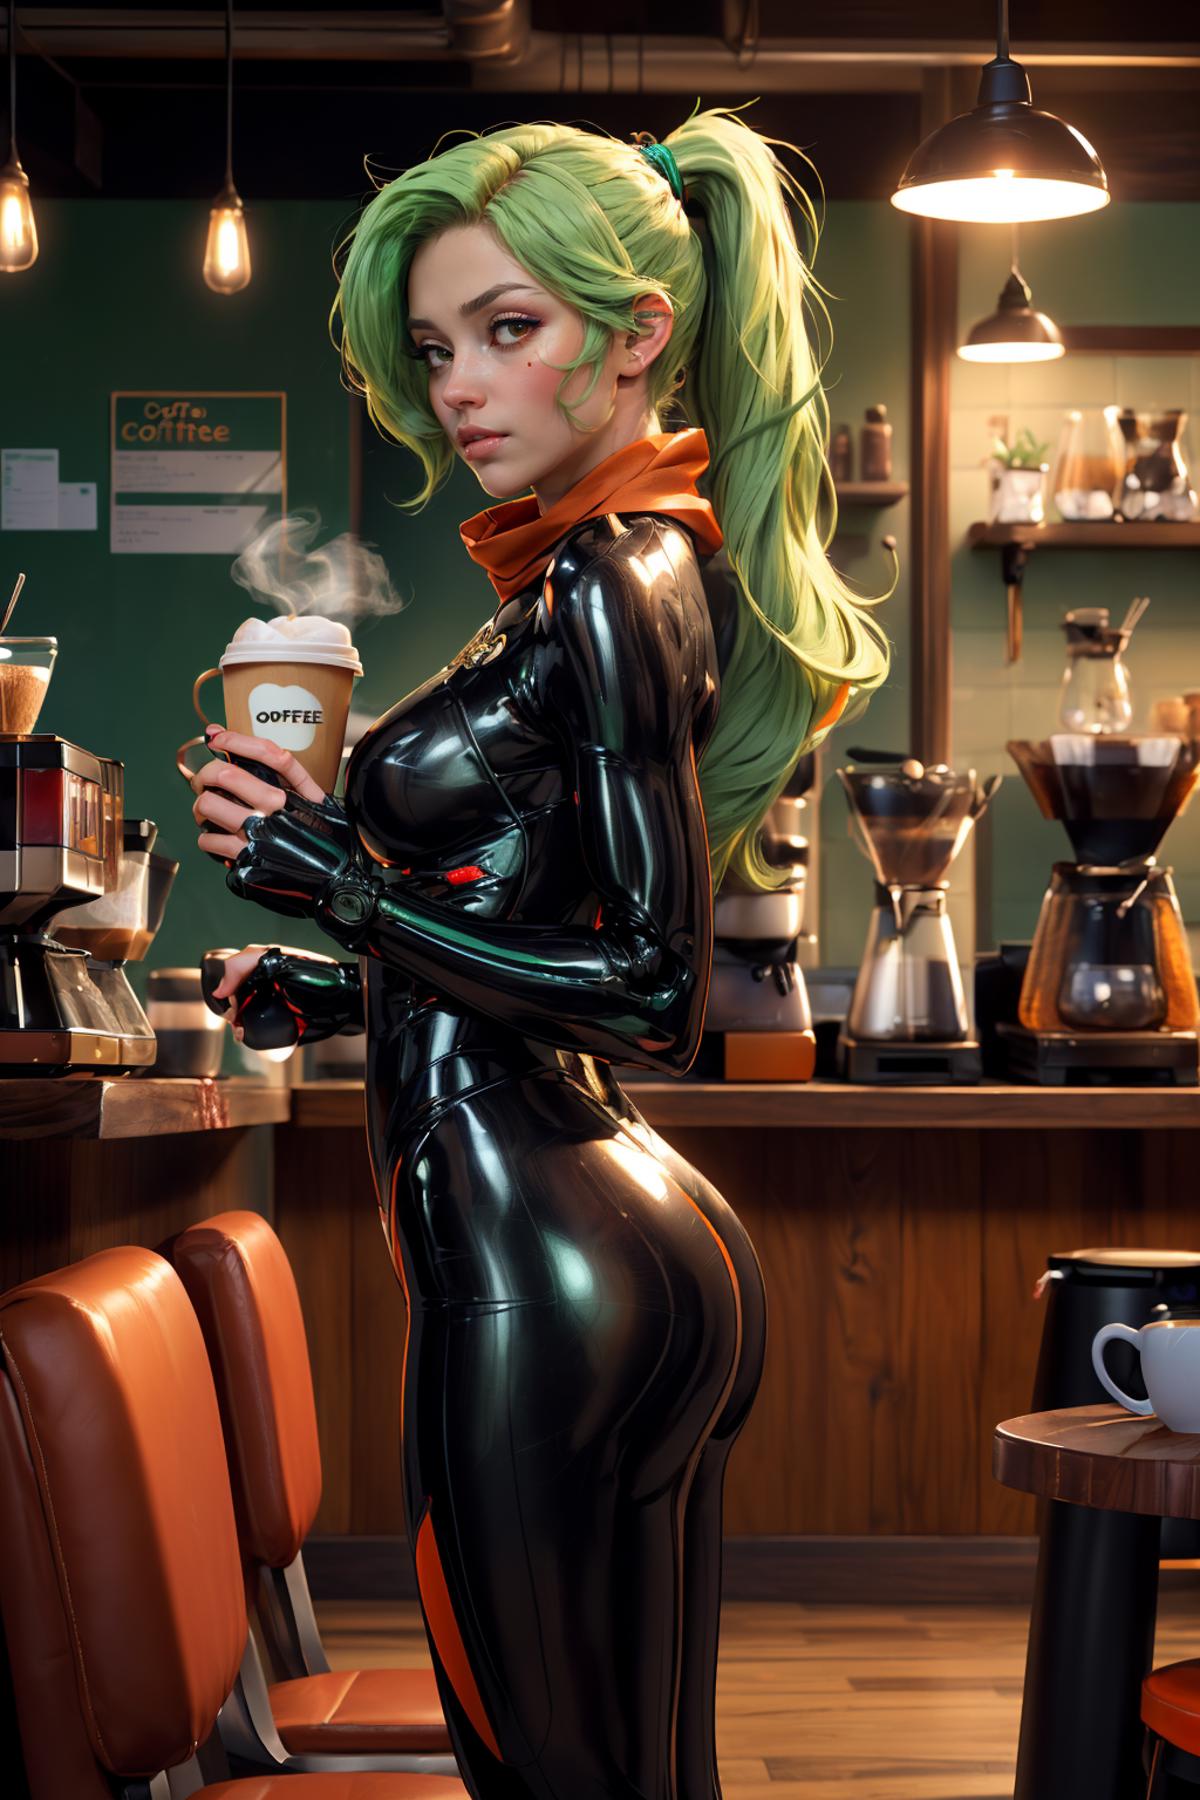 A woman in a tight black latex suit sipping coffee at a cafe.